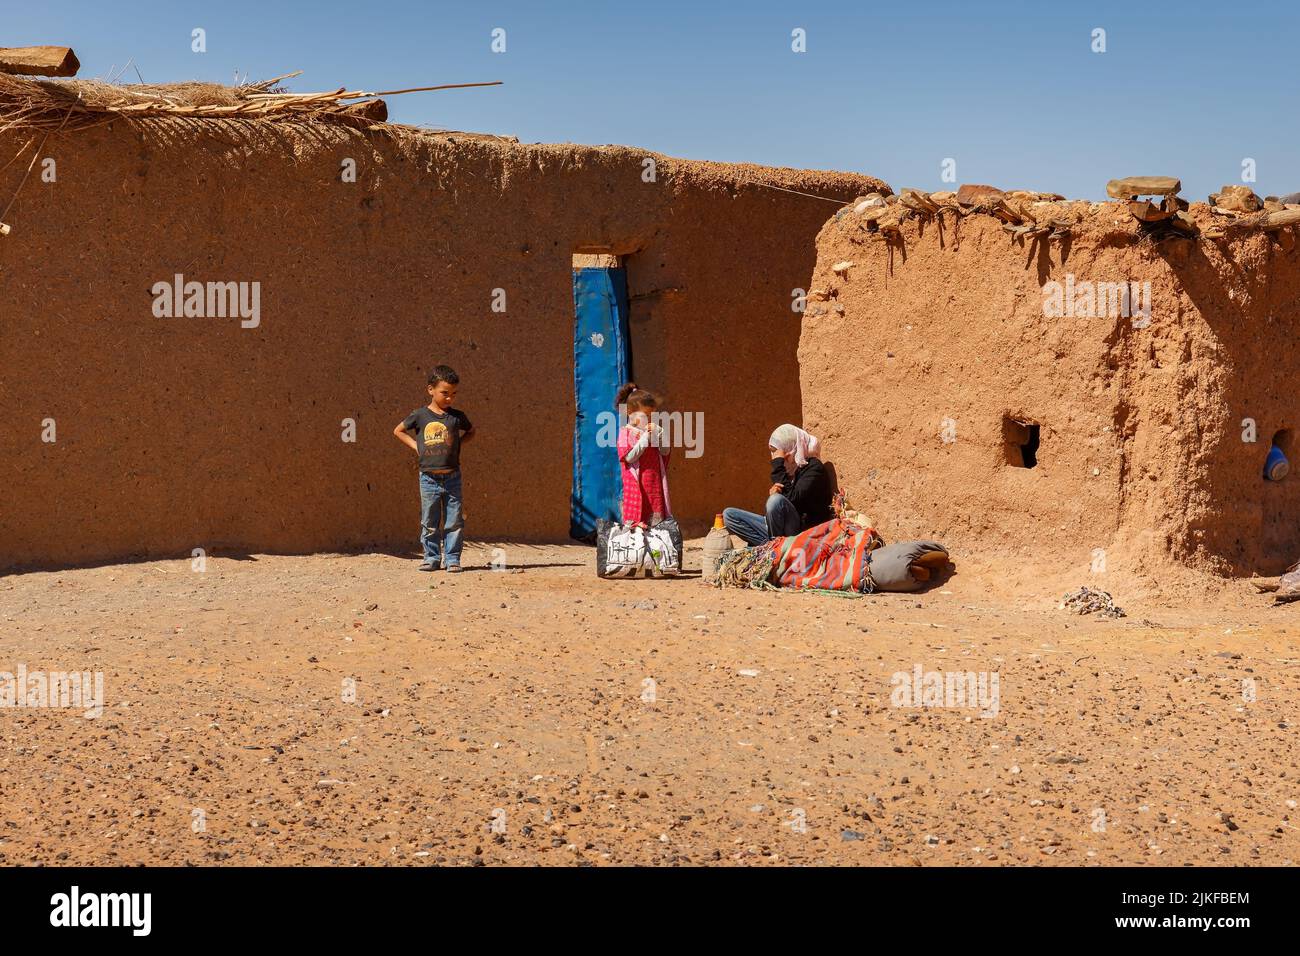 Errachidia Province, Morocco - October 15, 2015: Berber huts in the Sahara Desert. A sad Berber woman sits near the wall of the house outside, the chi Stock Photo